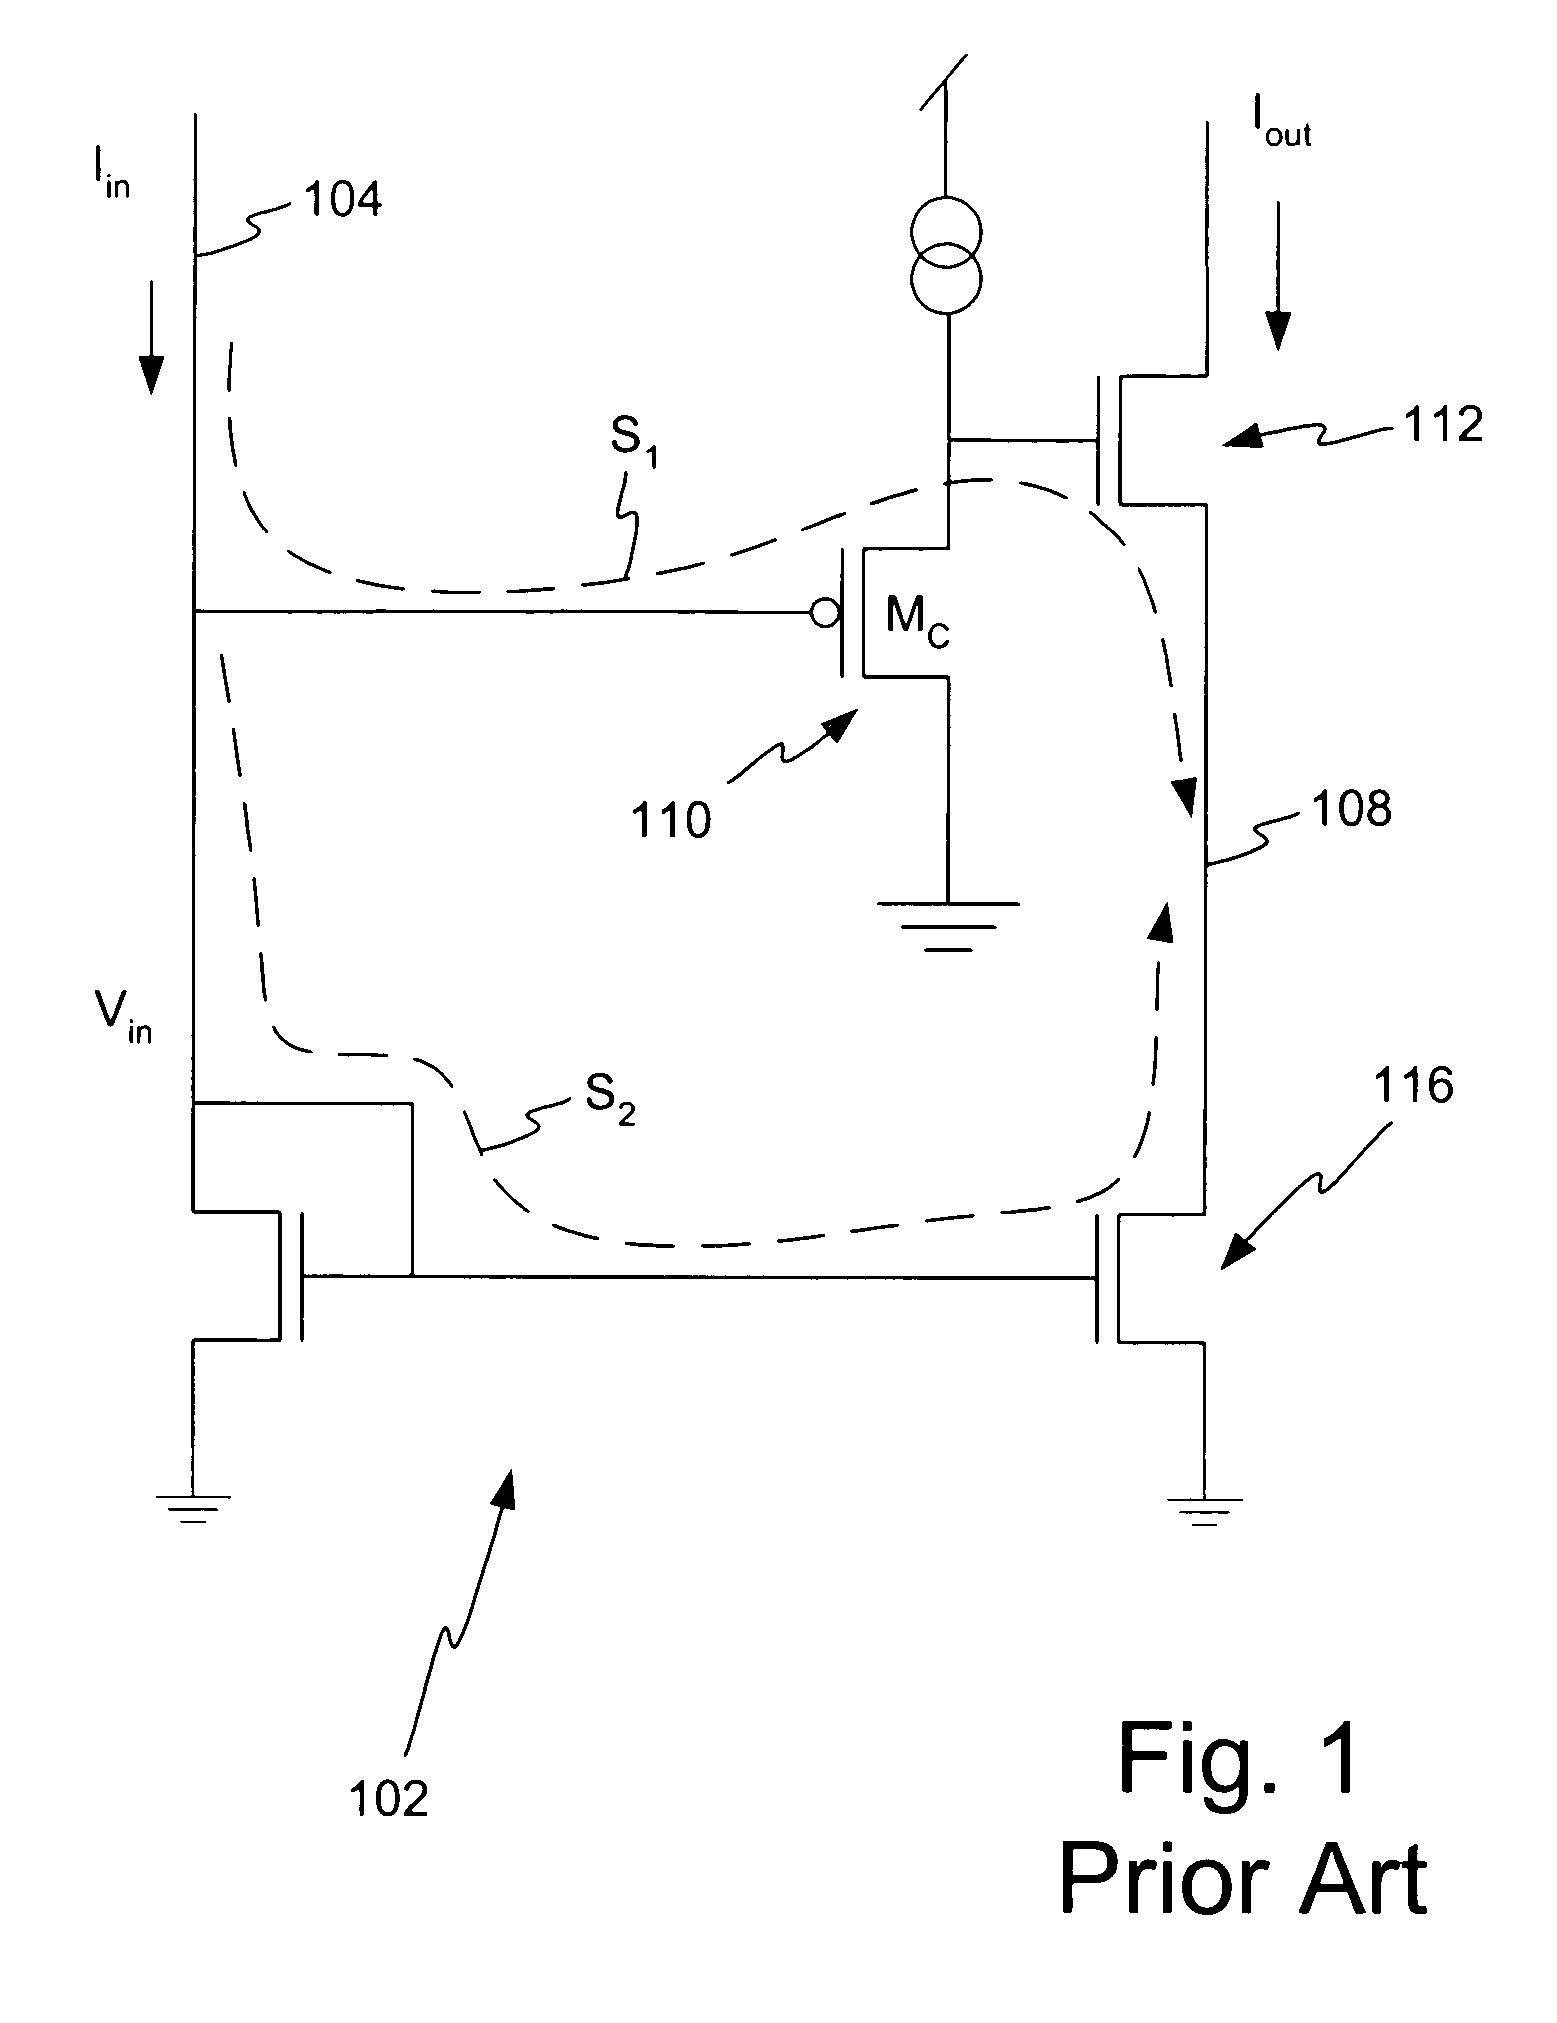 Method and apparatus for increasing the linearity and bandwidth of an amplifier